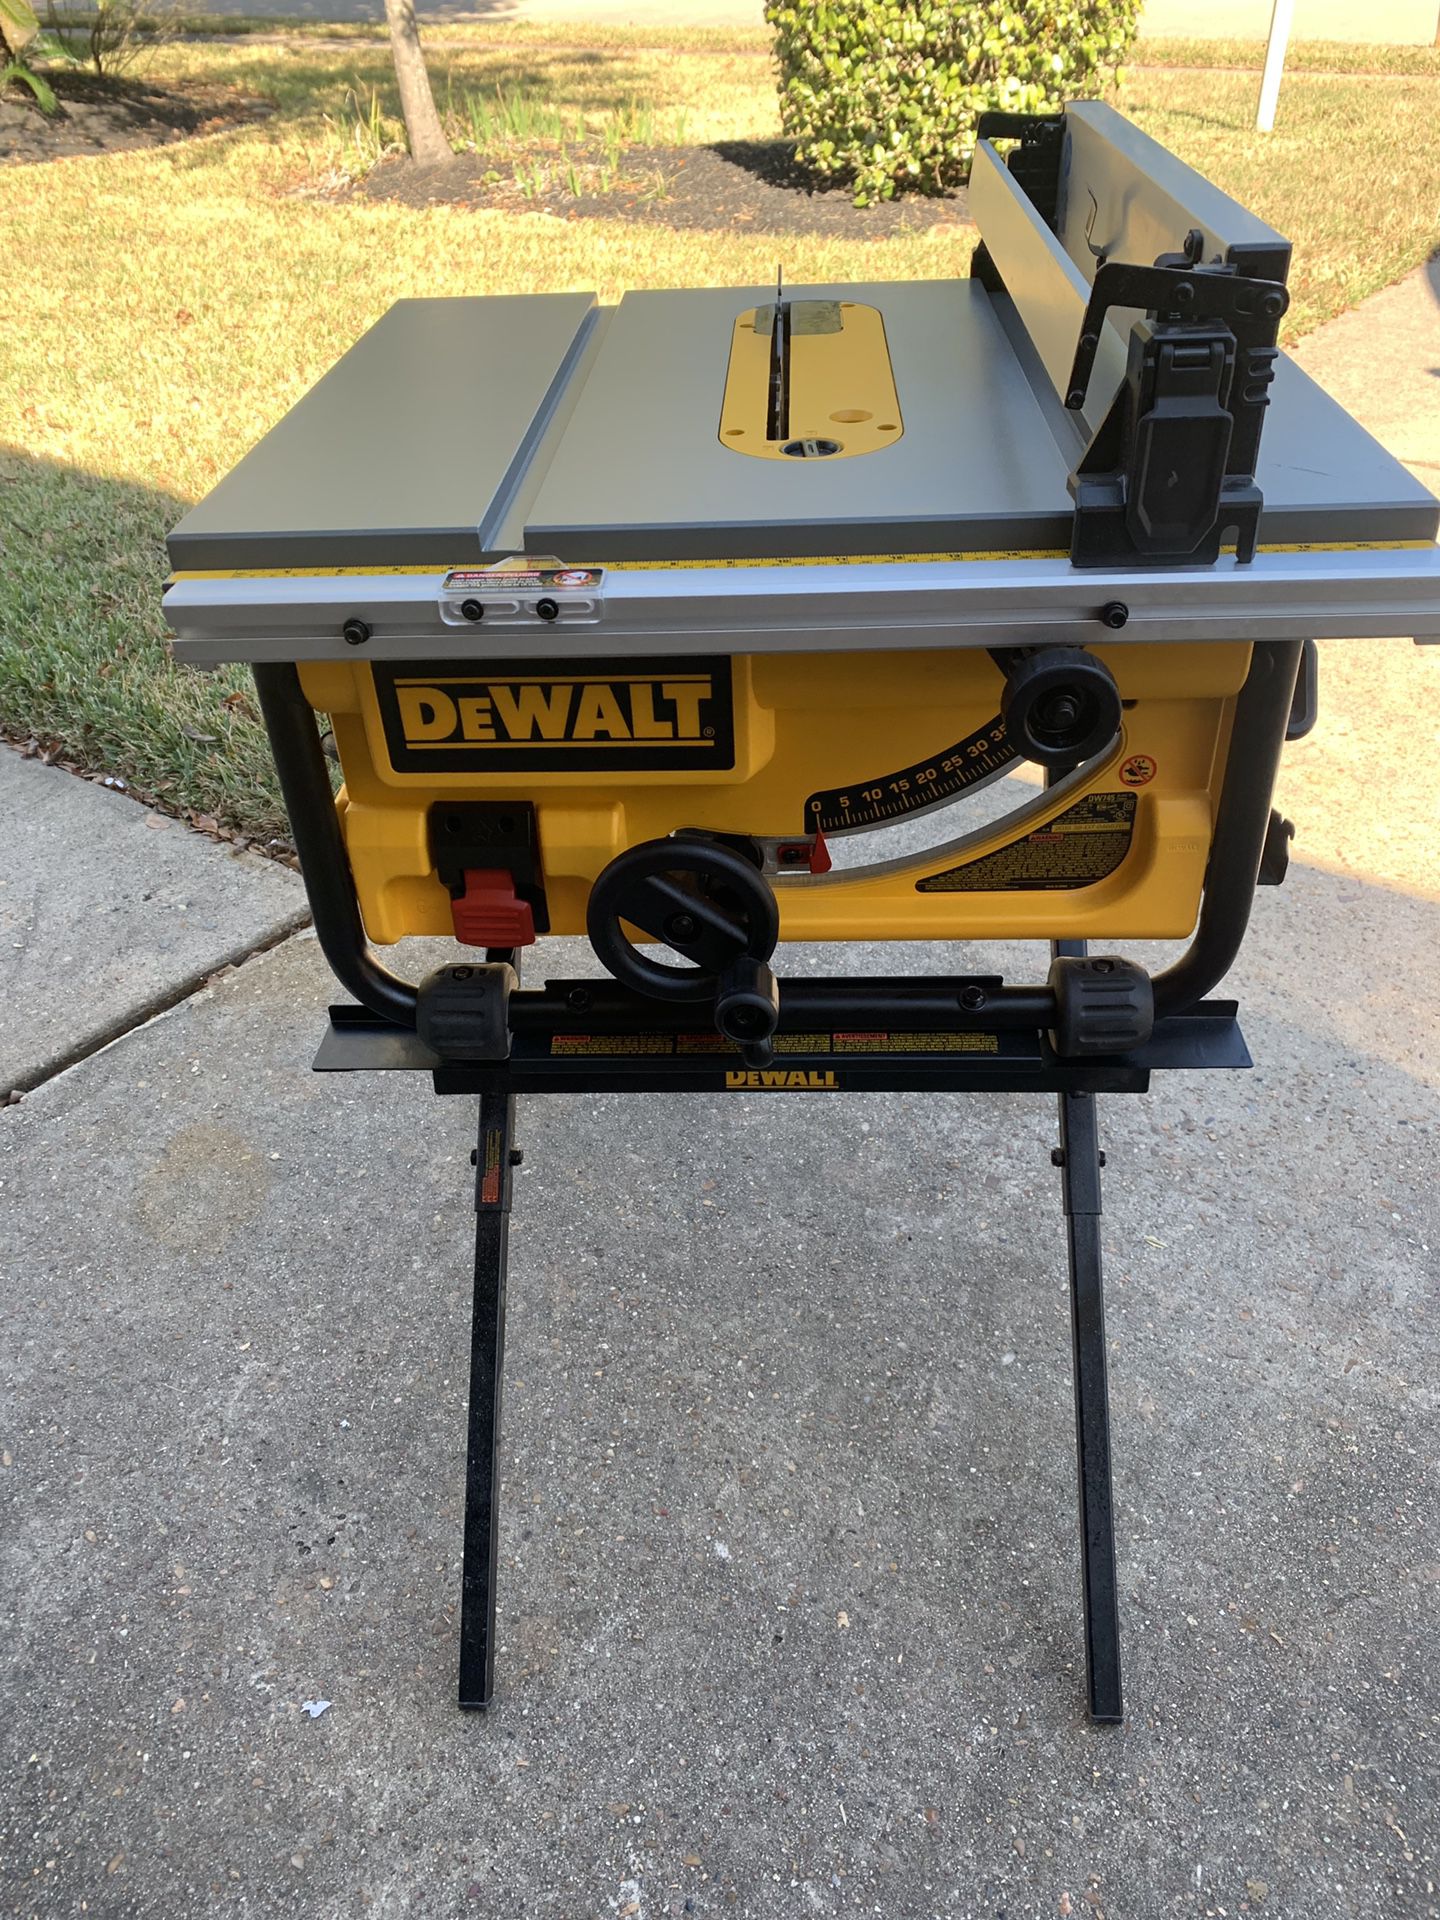 DEWALT 15-Amp Corded 10 in. Compact Job Site Table Saw w/ stand - comes as pictured - NEW